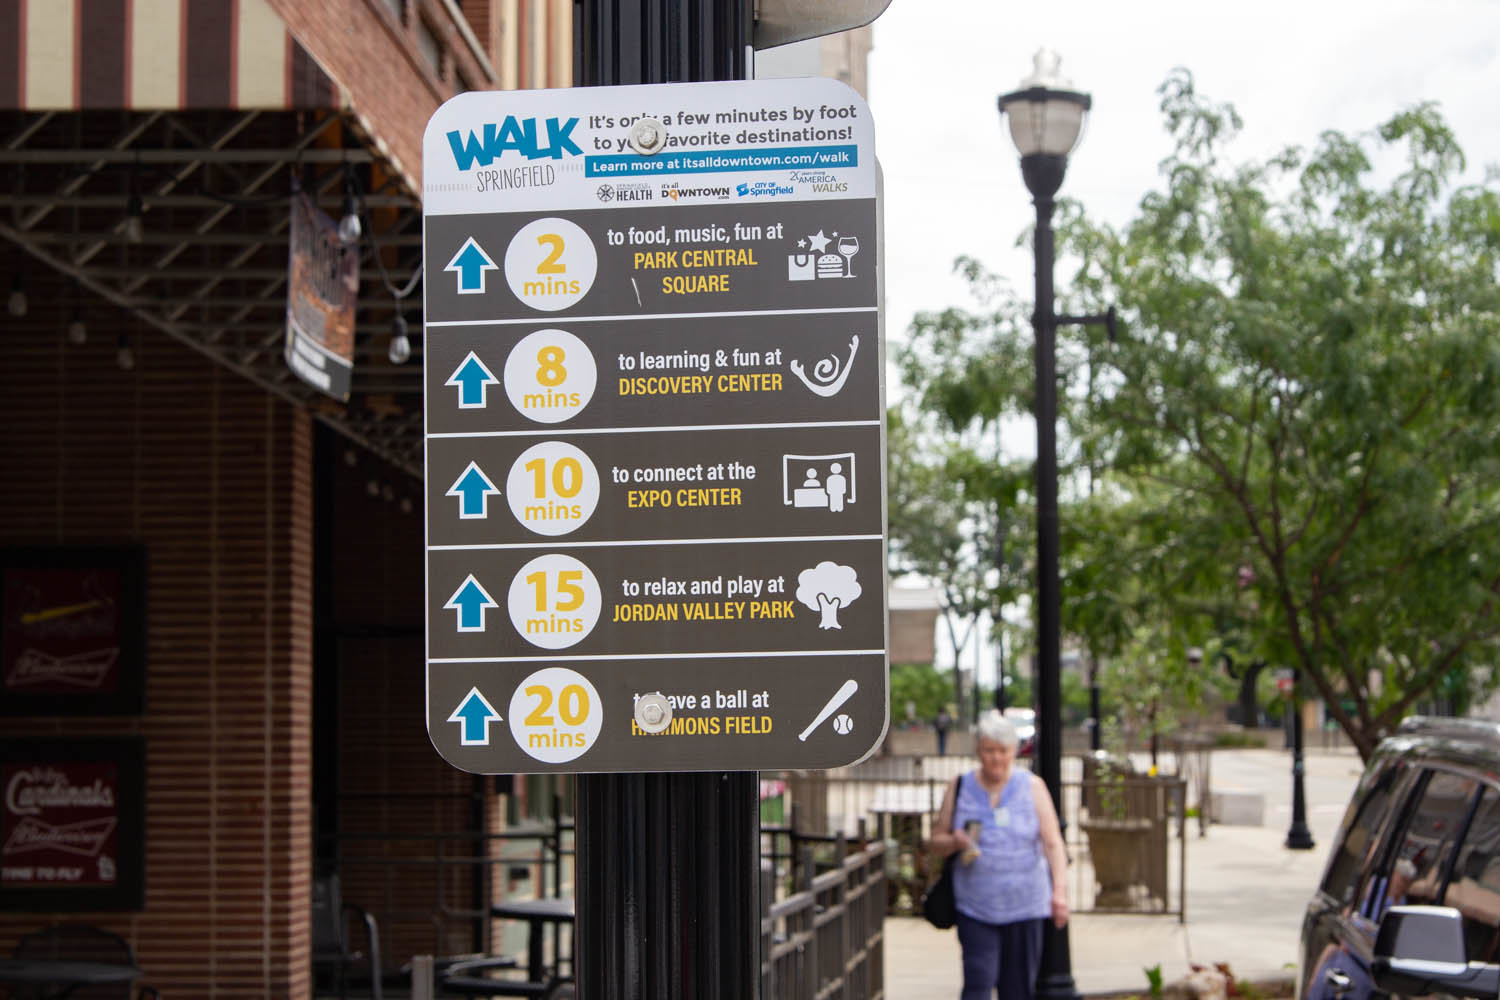 A sign near the intersection of Park Central West and Campbell Avenue provides a guide for walking visitors.